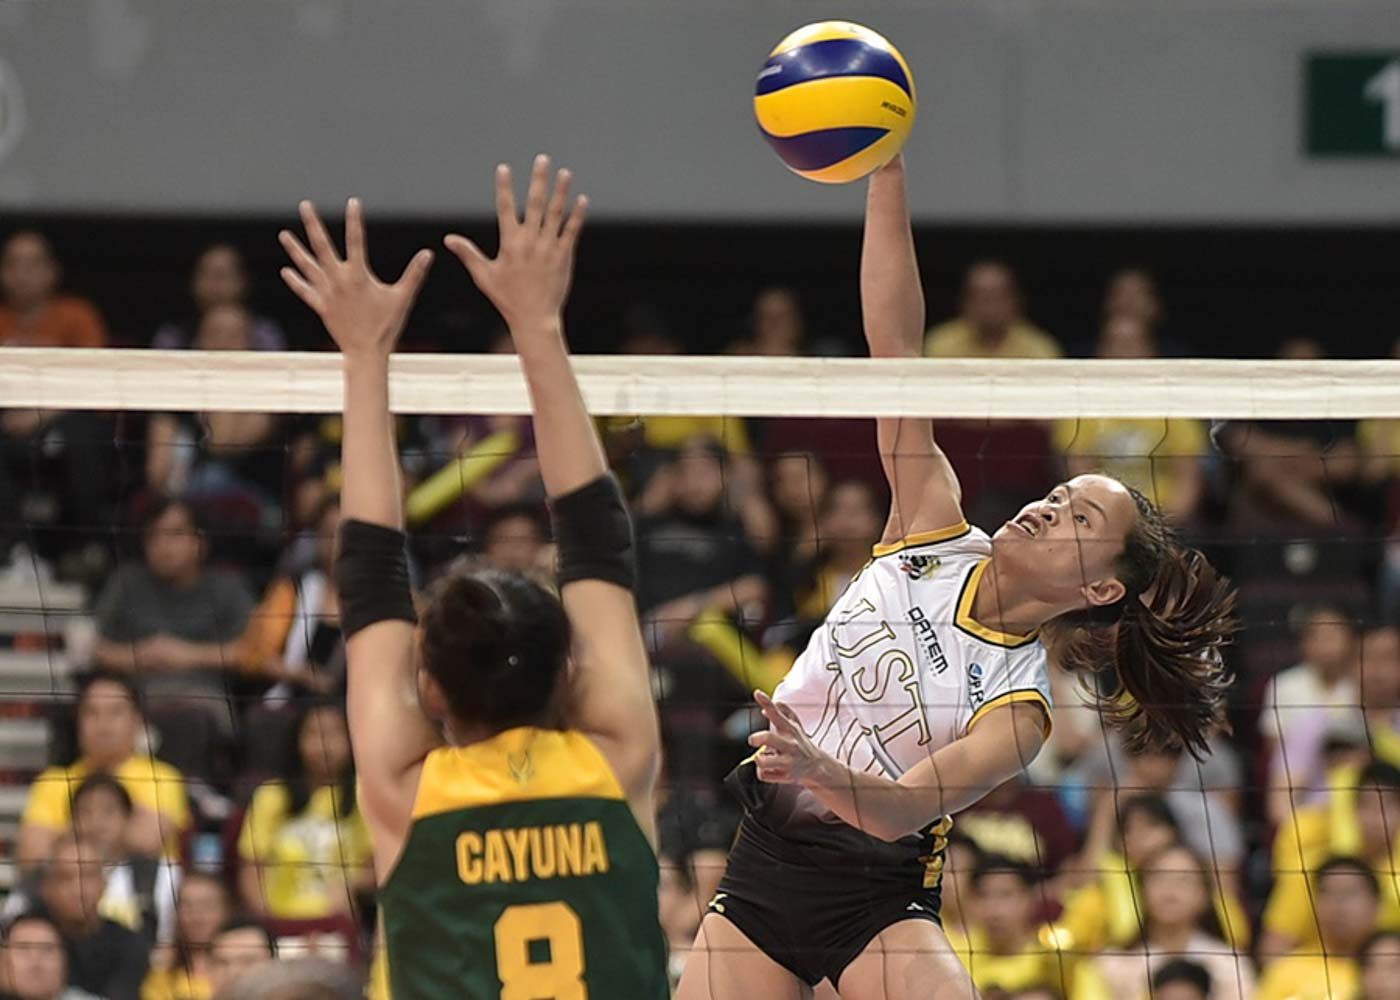 WATCH: Does UST’s Sisi Rondina want to win MVP?